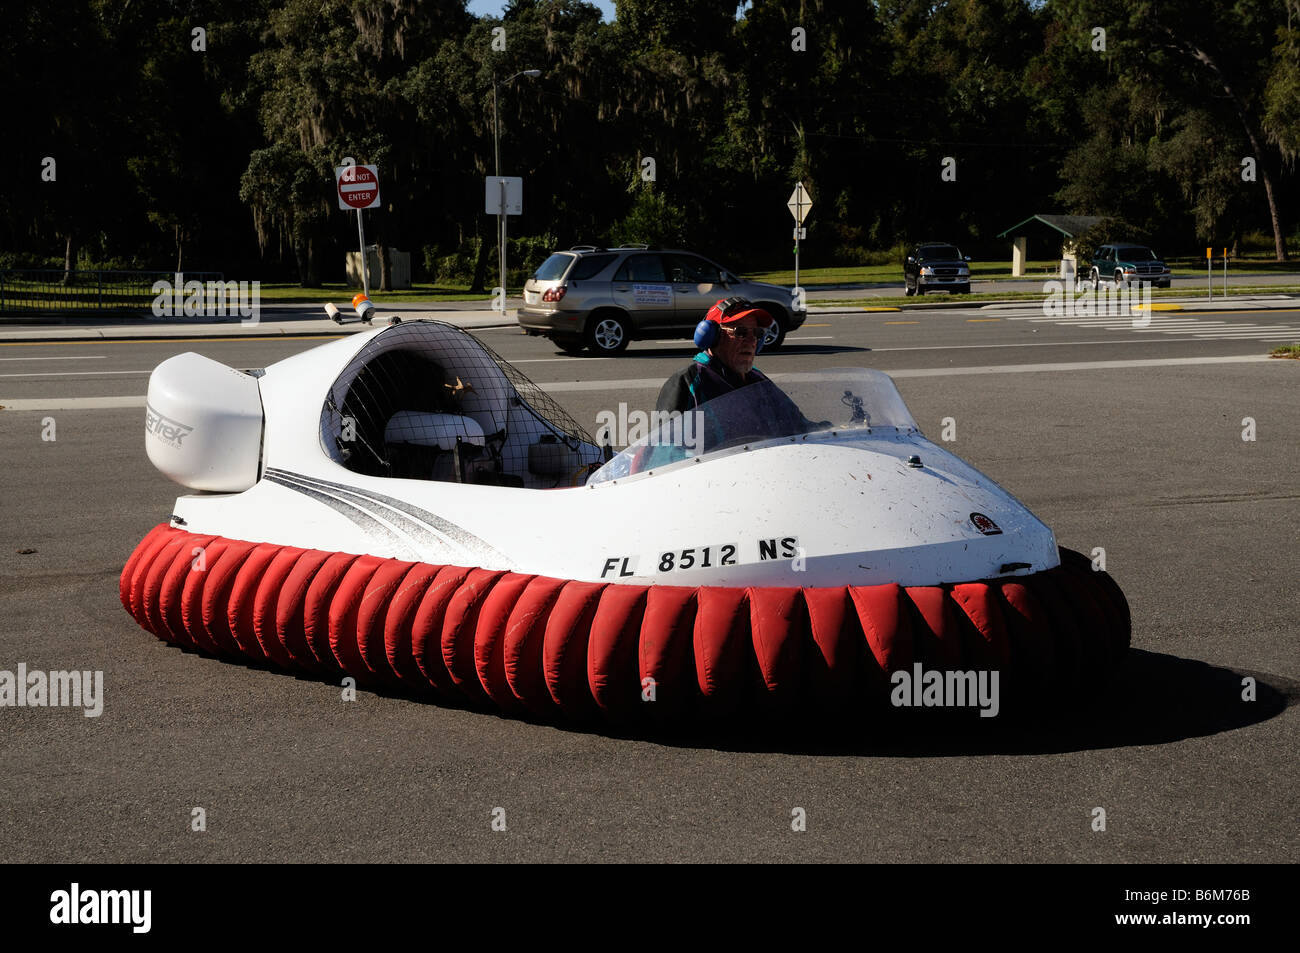 Personnel hovercraft and pilot seen in Inverness city Florida USA Stock Photo